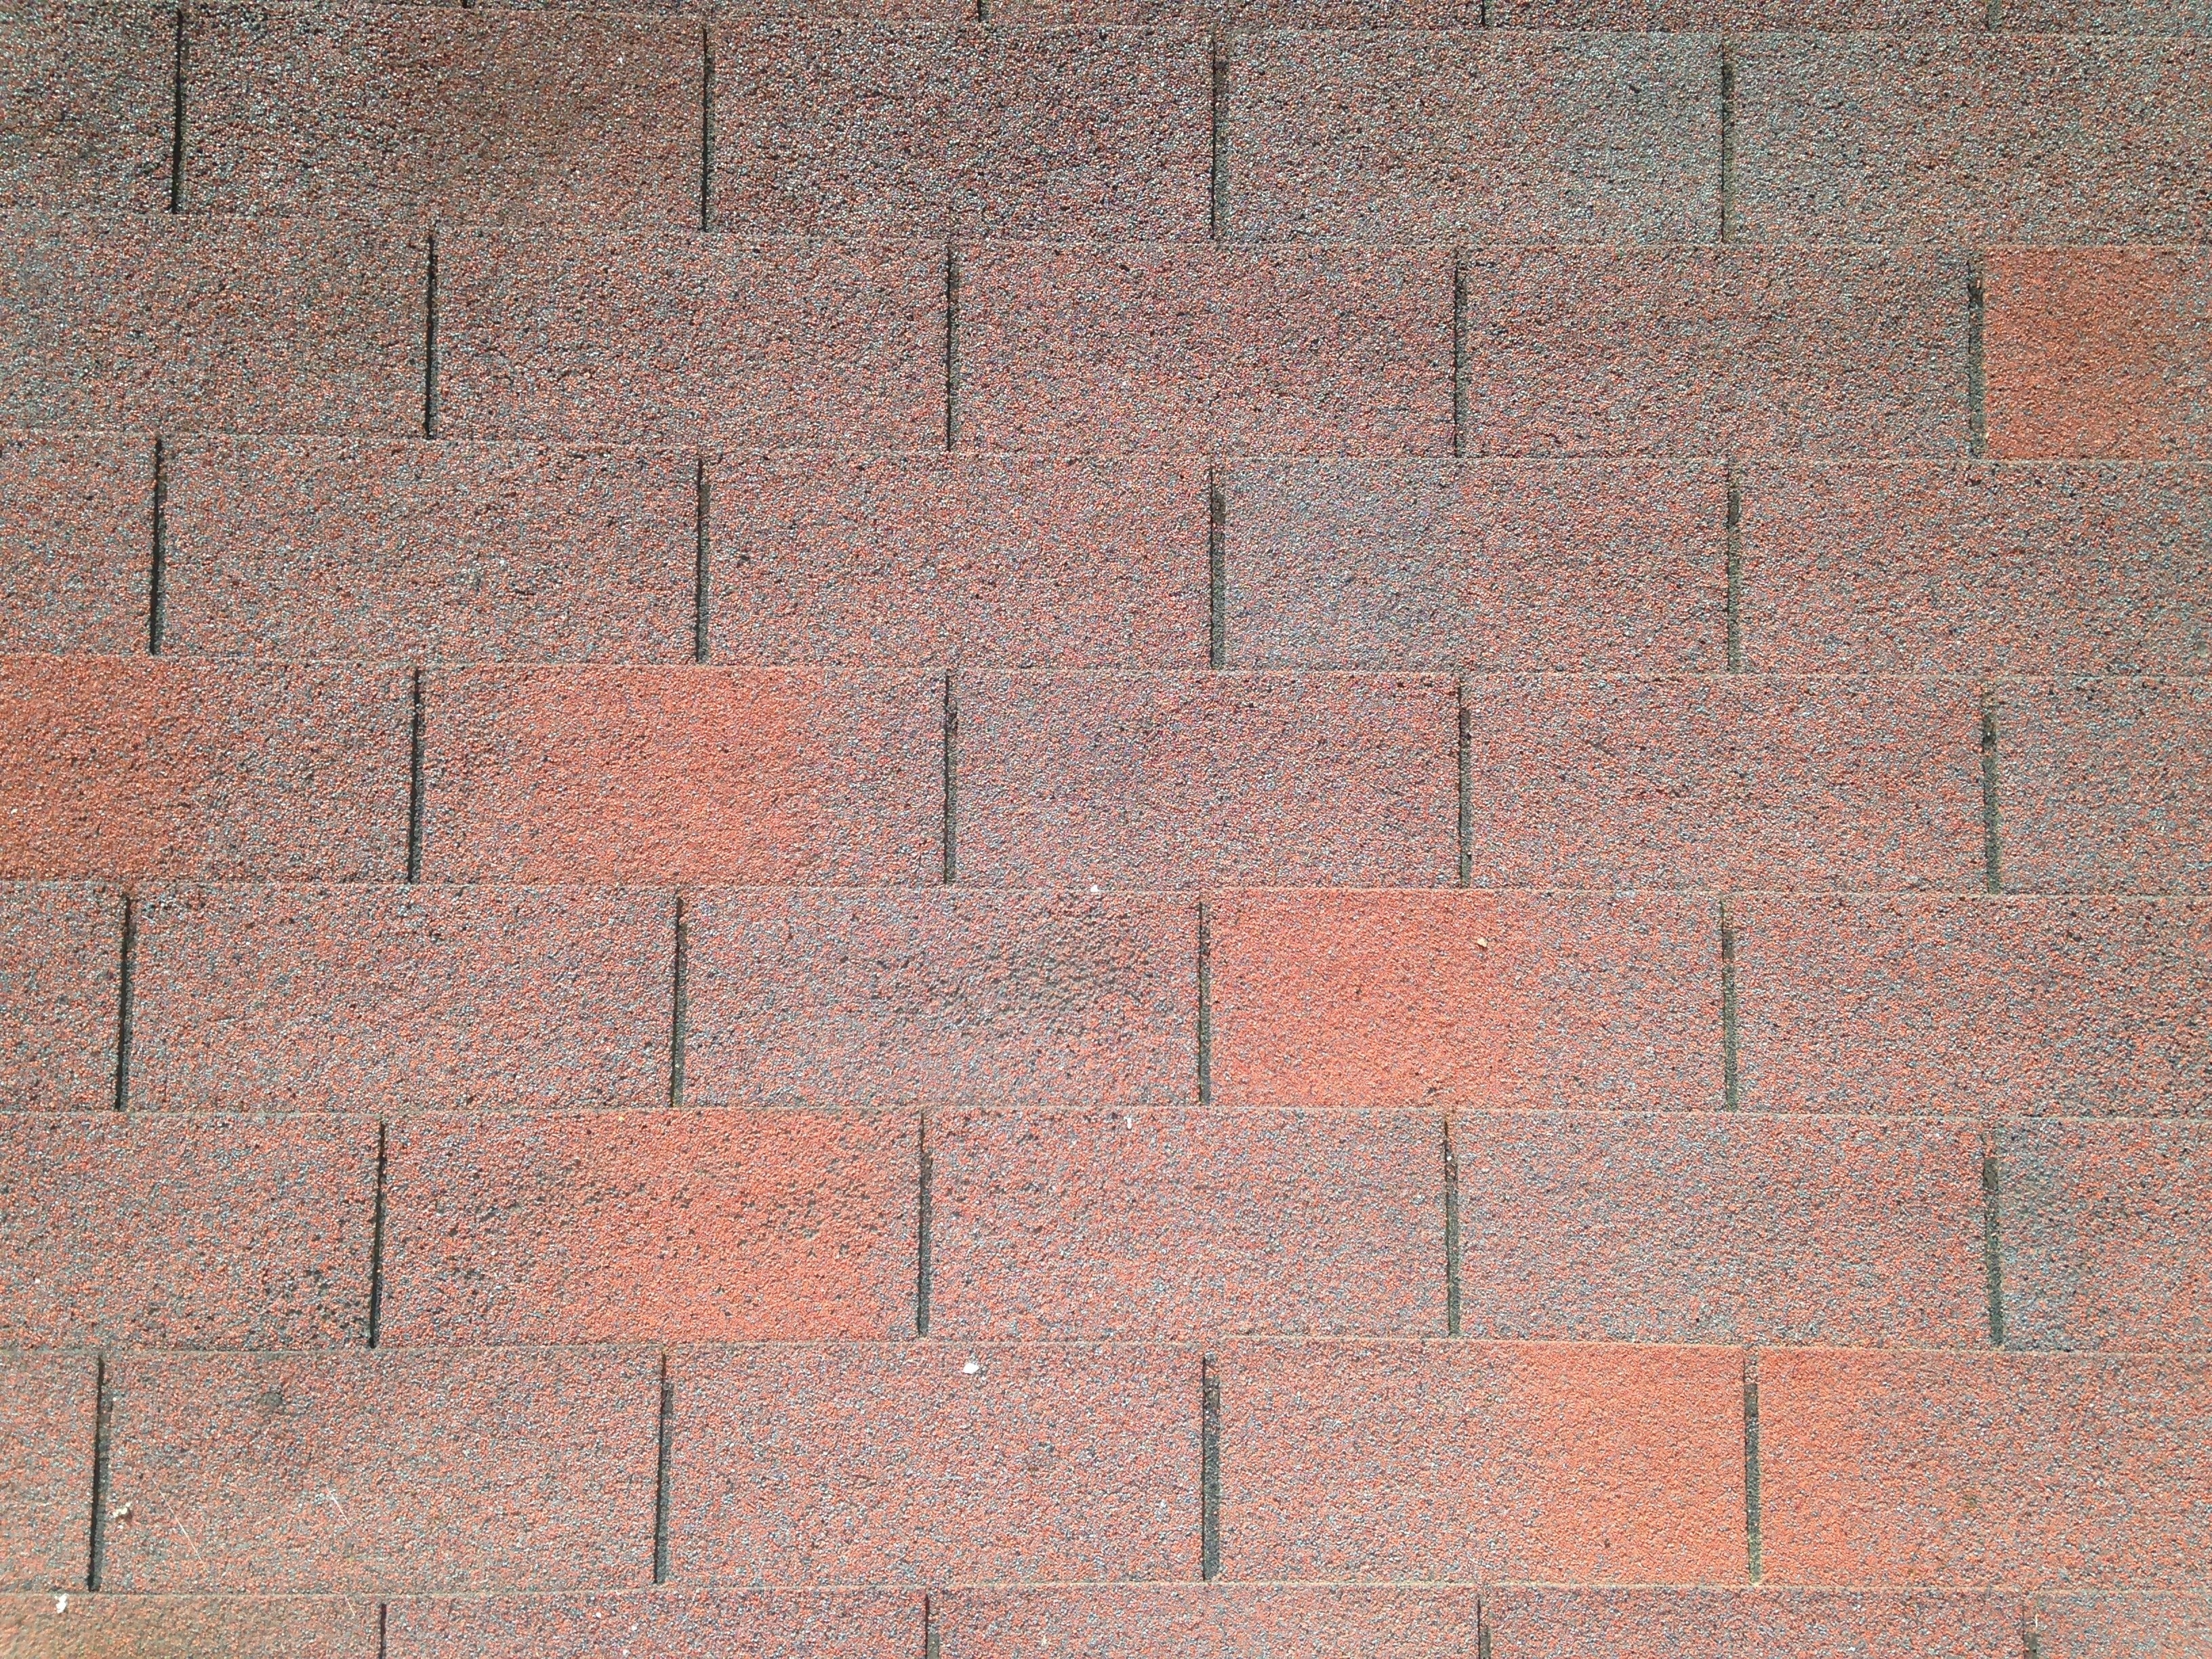 person taking a picture of brown brick surface